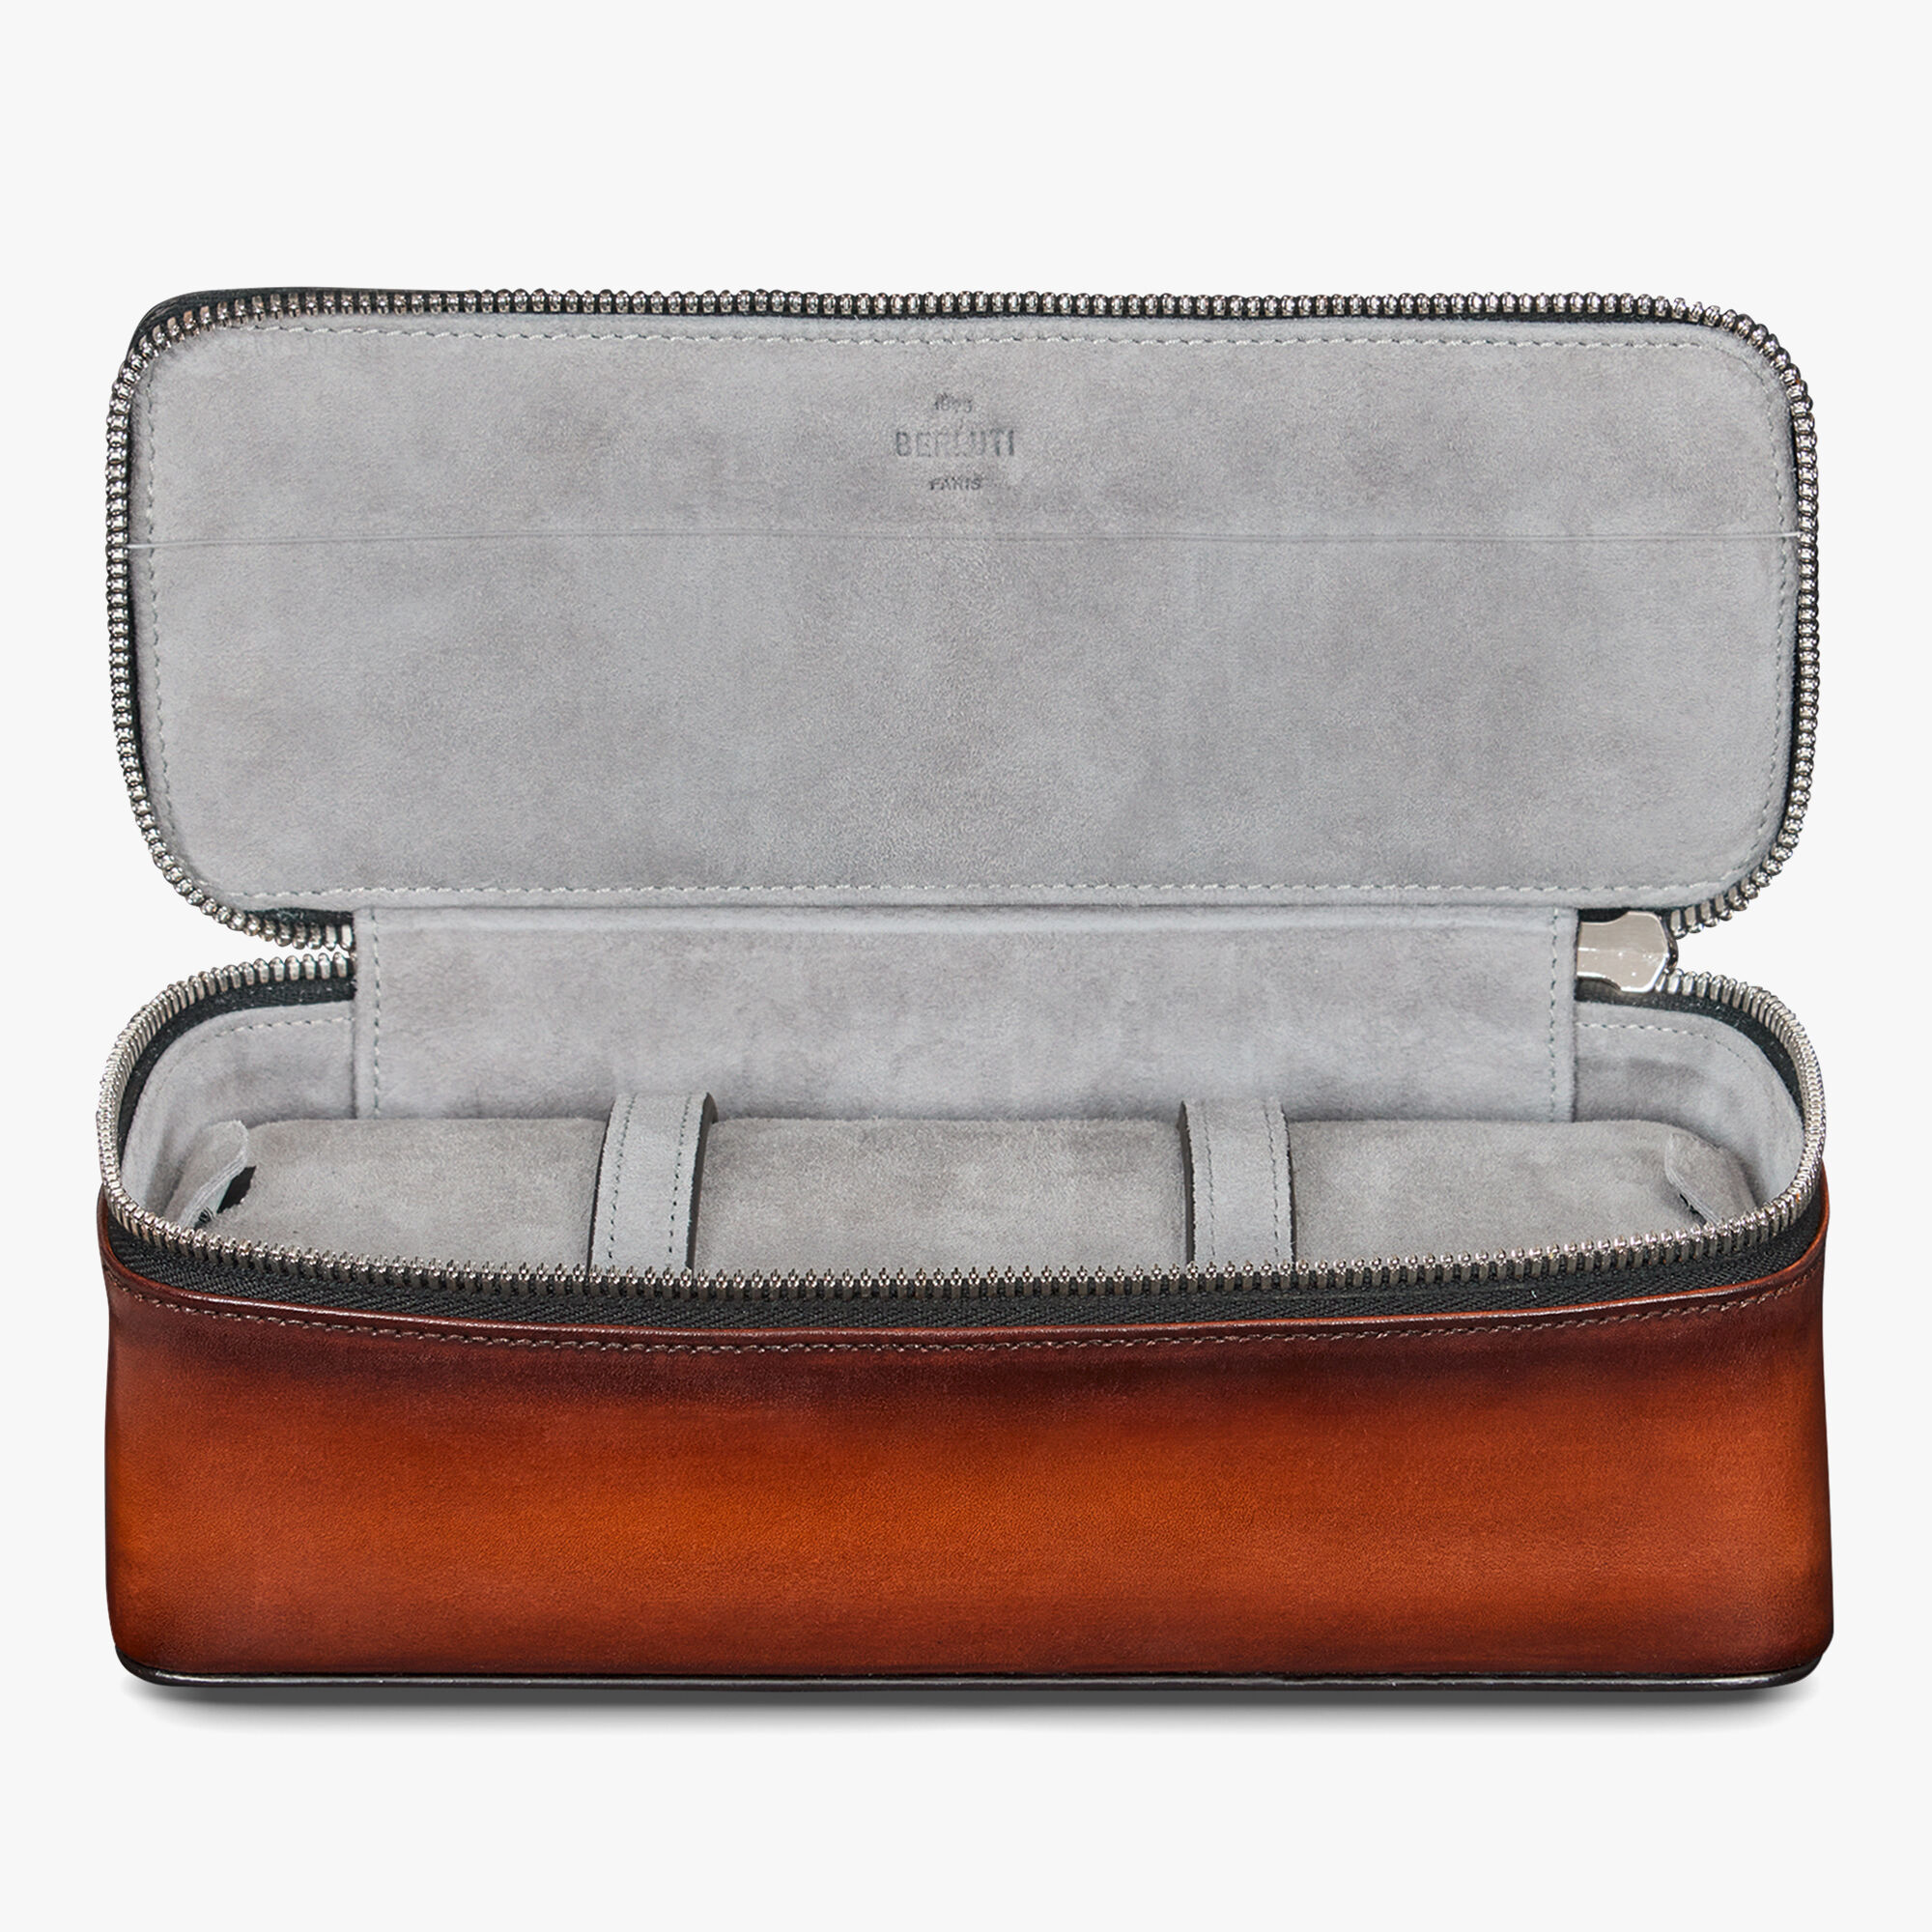 Wallet collections by Berluti